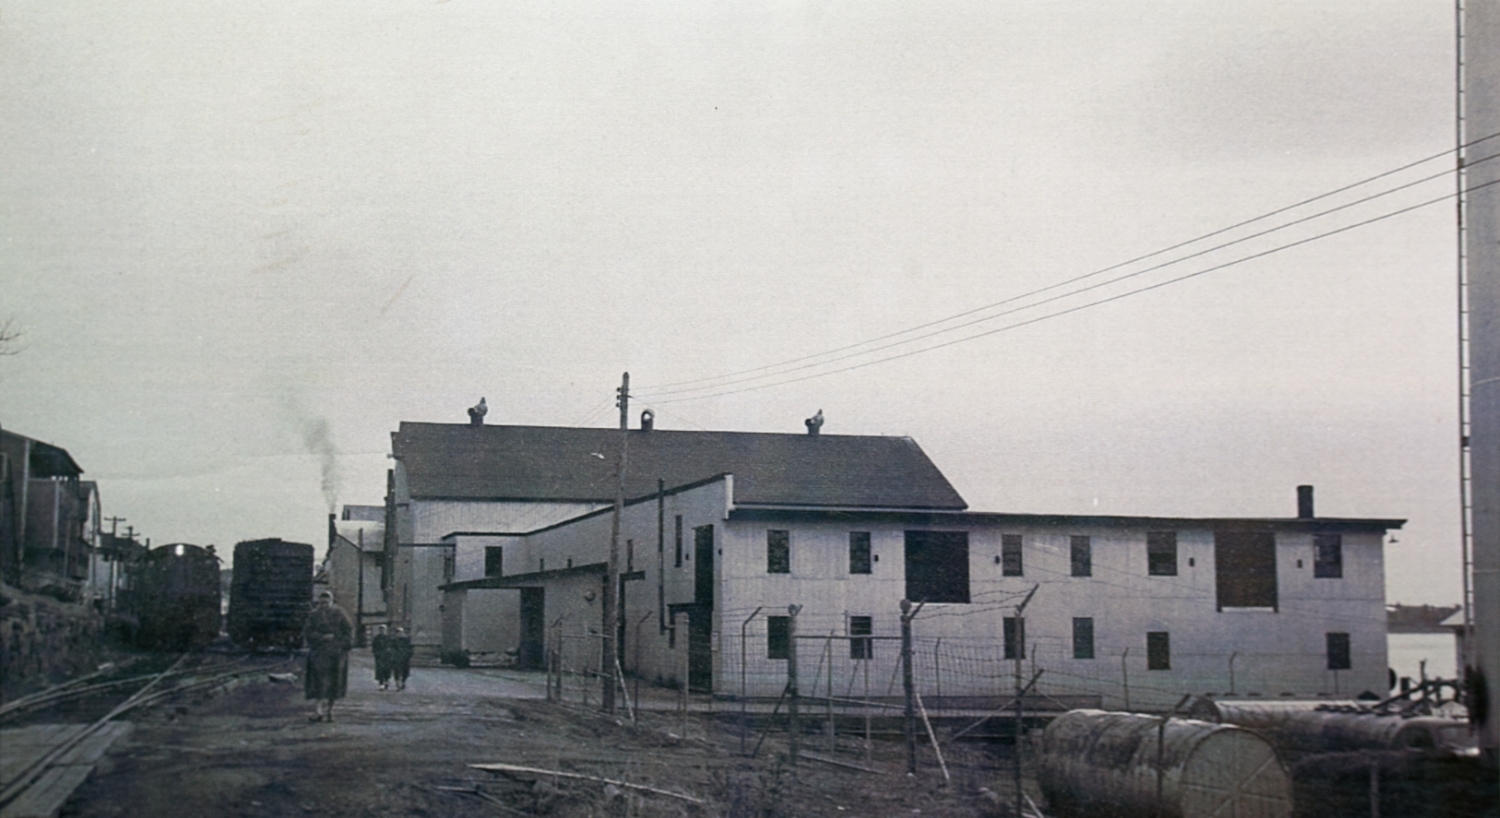 Archival photograph of a grouping of wooden industrial buildings by the edge of Lunenburg Harbour.